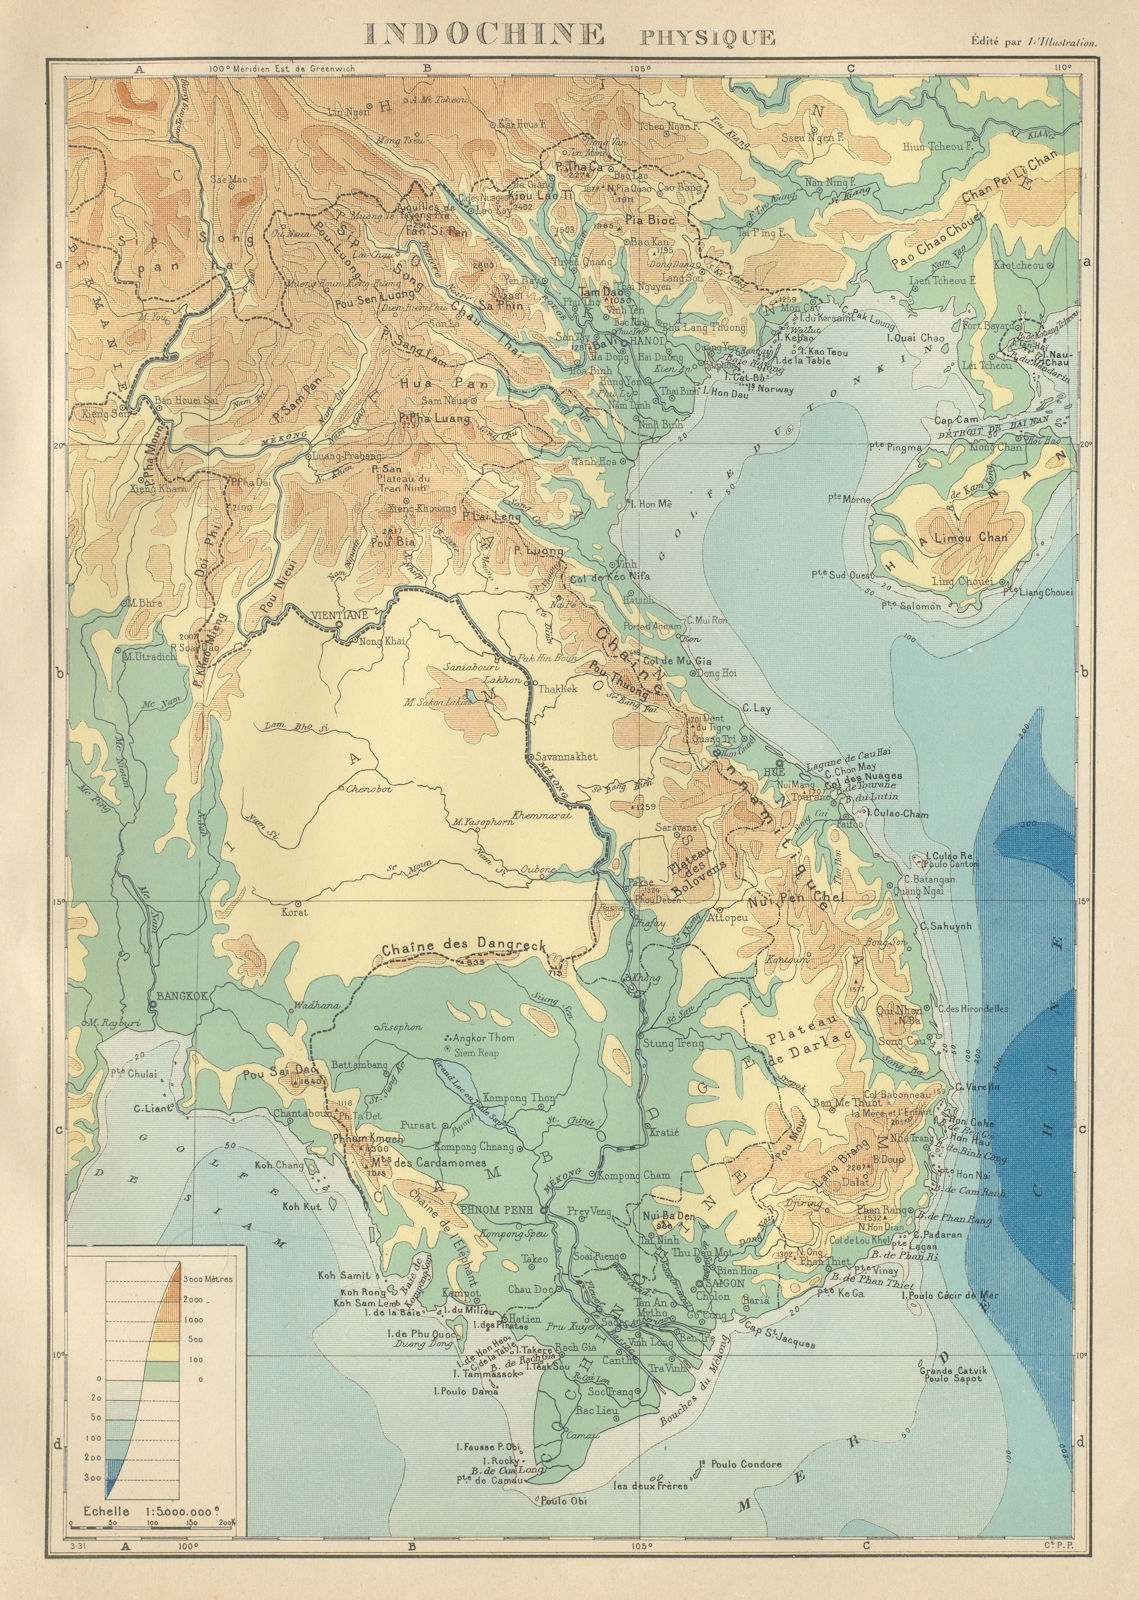 COLONIAL FRENCH INDOCHINA. Indochine française. Physique. Physical 1931 map